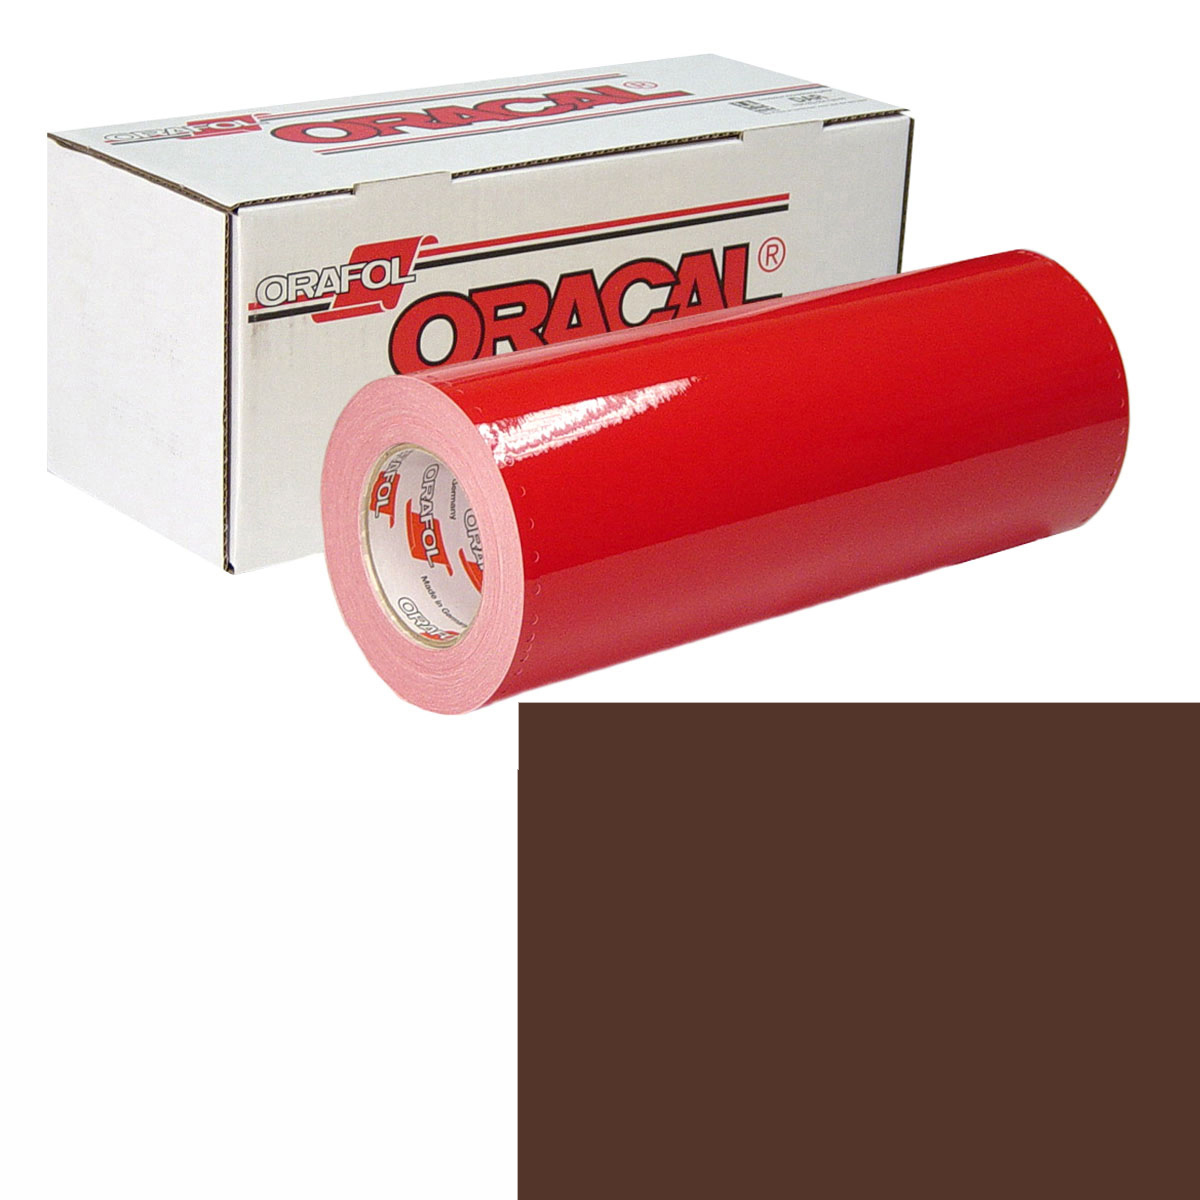 ORACAL 951 30in X 10yd 810 Cocoa Brown